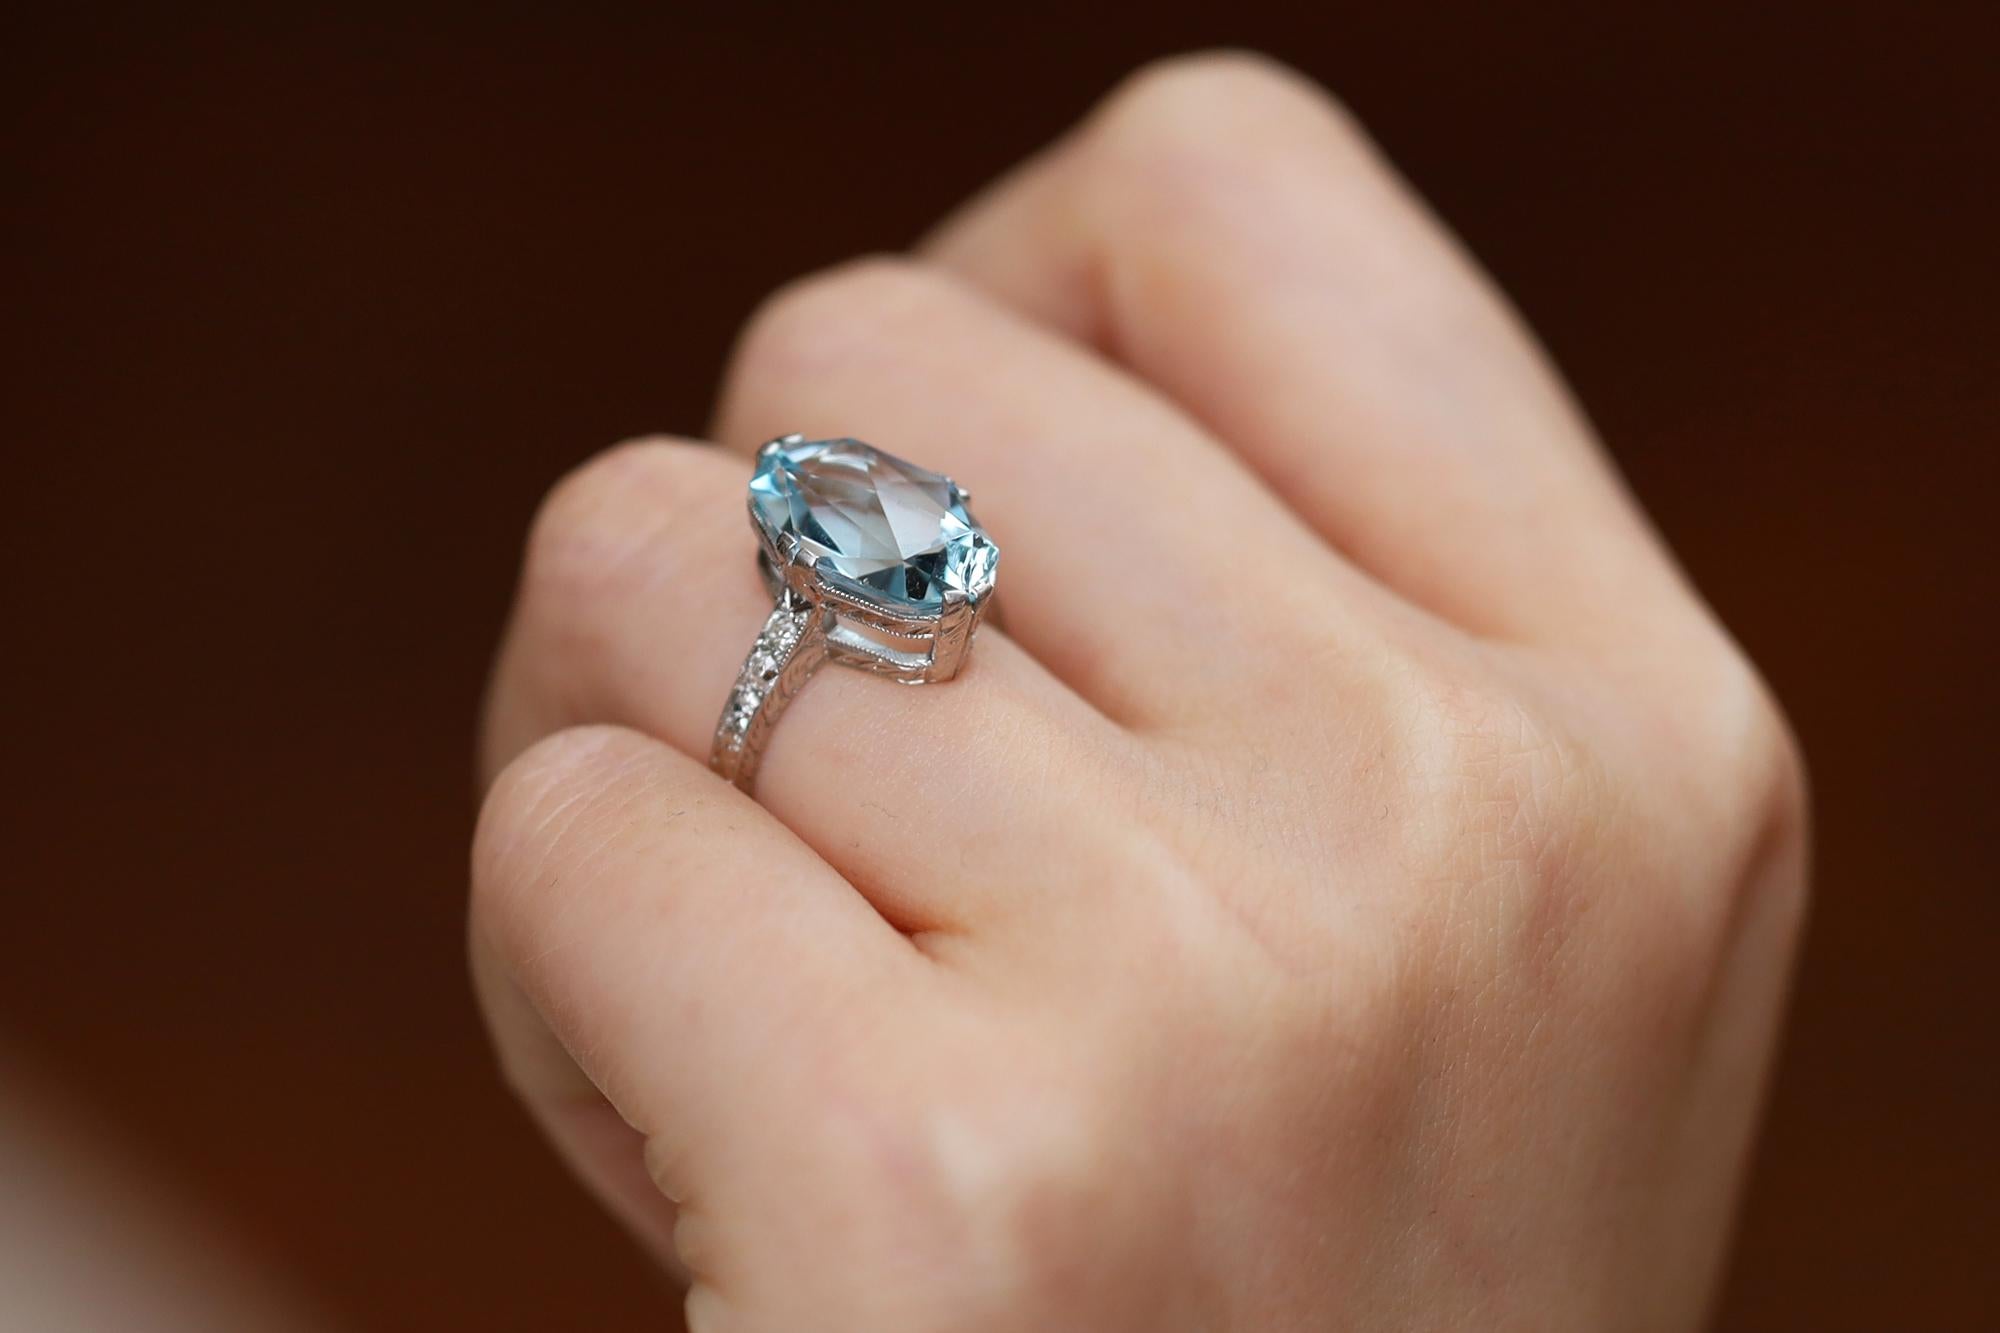 A signed La Graves engagement ring, antique from the resplendent Belle Époque era of the early 1900s. Centered by a 6 carat light blue Aquamarine, expertly cut into a double faceted oval with 6 antique diamonds flanking the natural gem. Crafted with